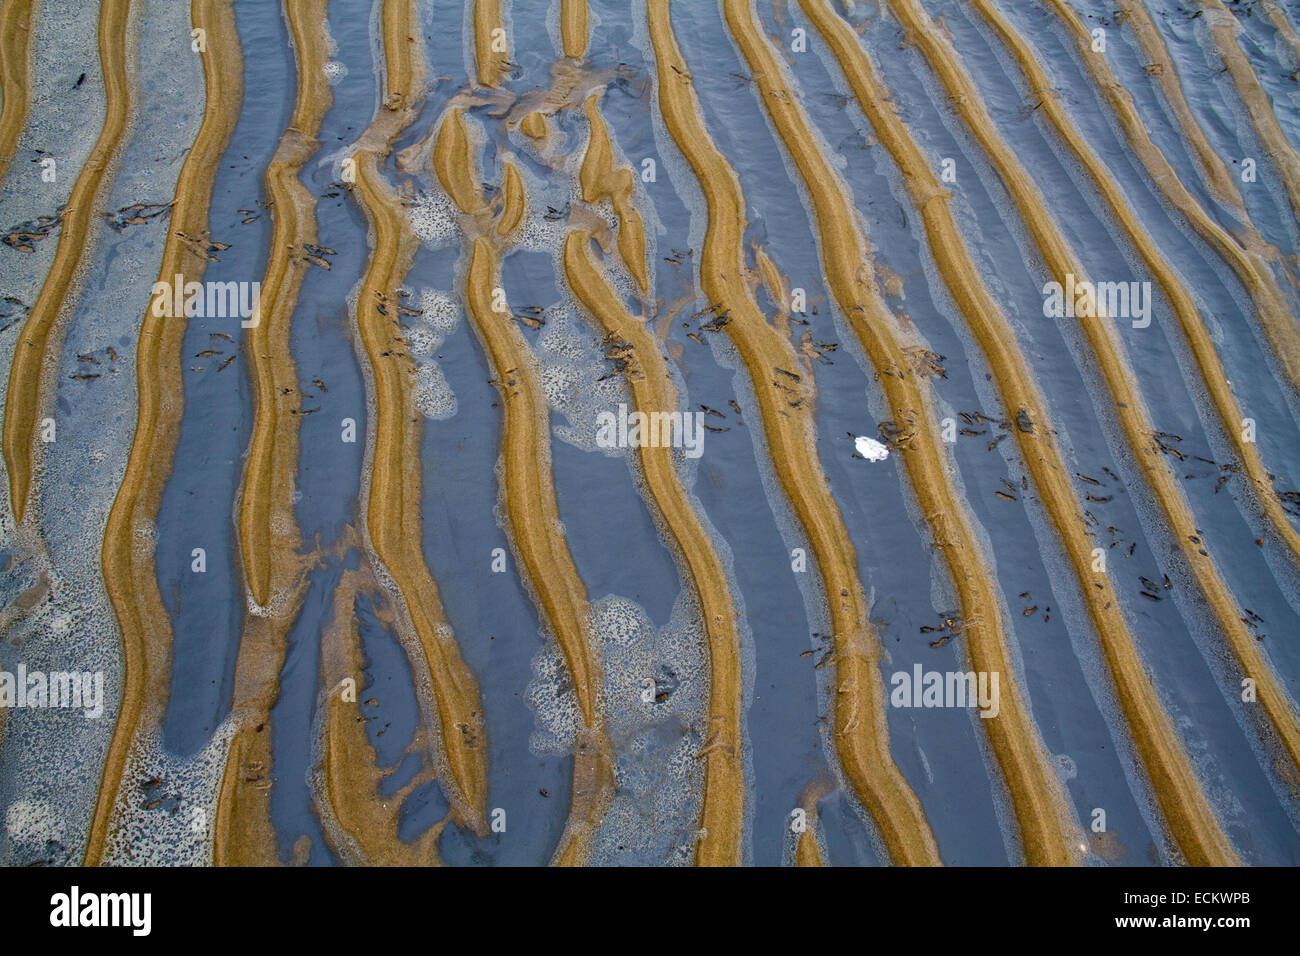 Sedimentation of clay on a pattern of ripples in sand on a beach Stock Photo